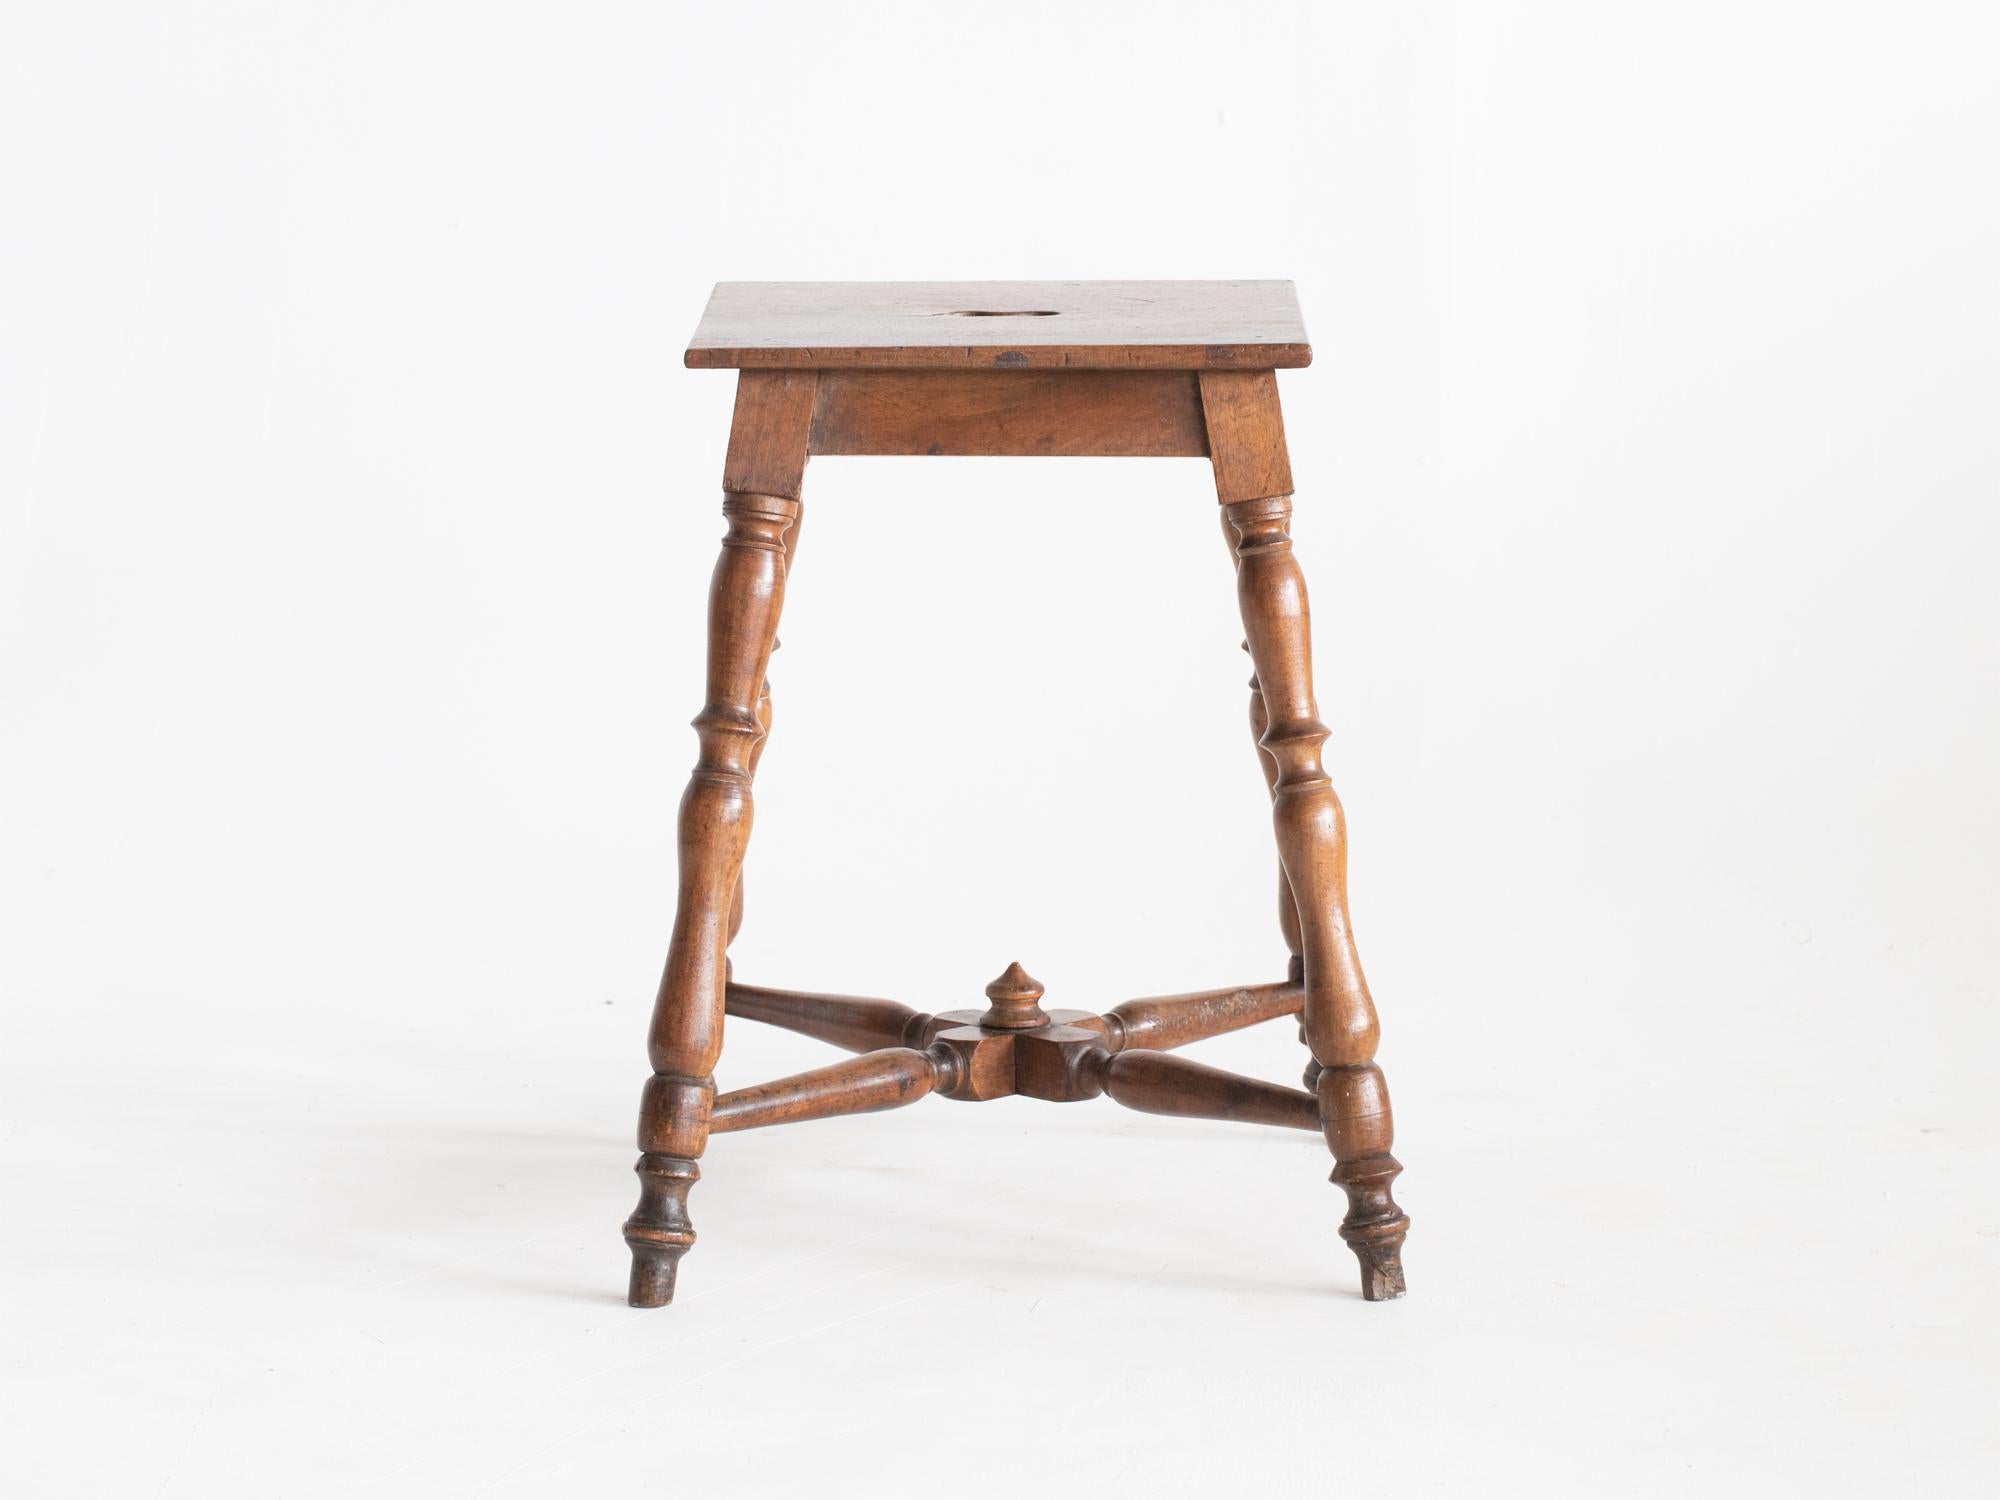 A vernacular French walnut stool raised on turned legs, 19C.

In good sturdy order with charming wear and patina.

55 x 46 x 46 cm (21.7 x 18.1 x 18.1 